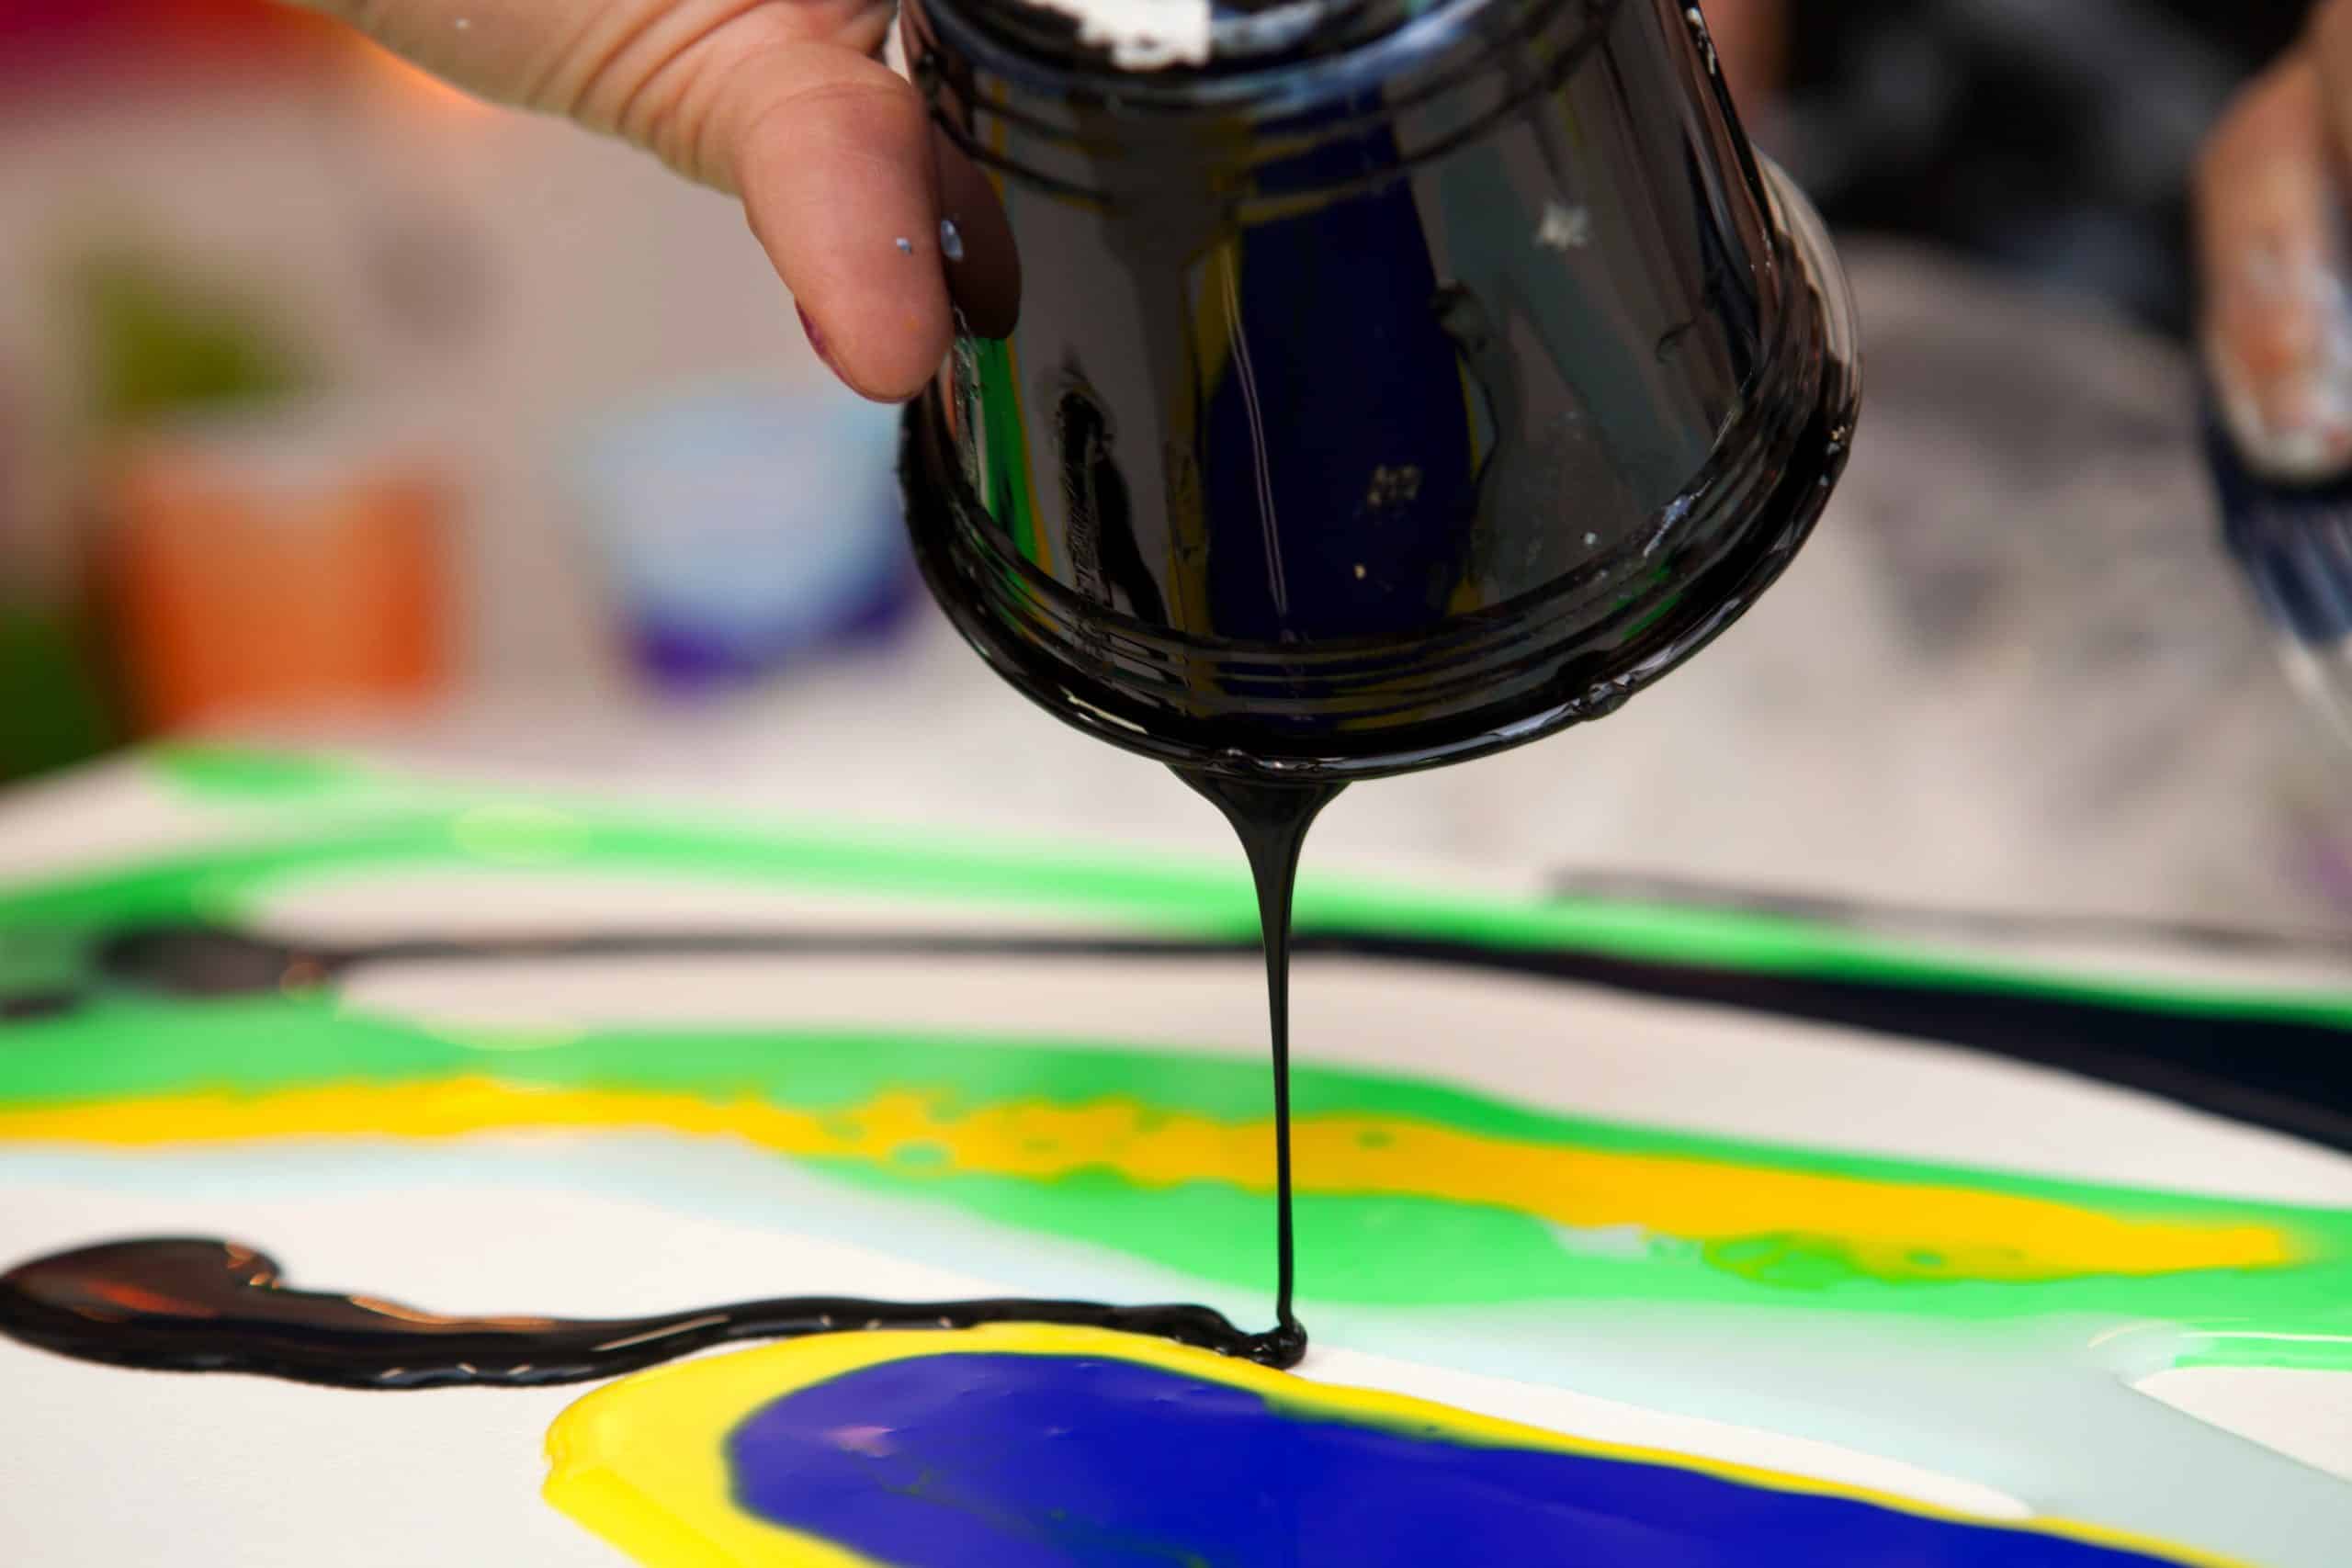 A person pours a small stream of black paint from a plastic cup onto a canvas with swirls of green neon and yellow during the process of fluid painting with acrylic paints mixed with floetrol medium.; Shutterstock ID 1420128320; Purchase Order: AD126